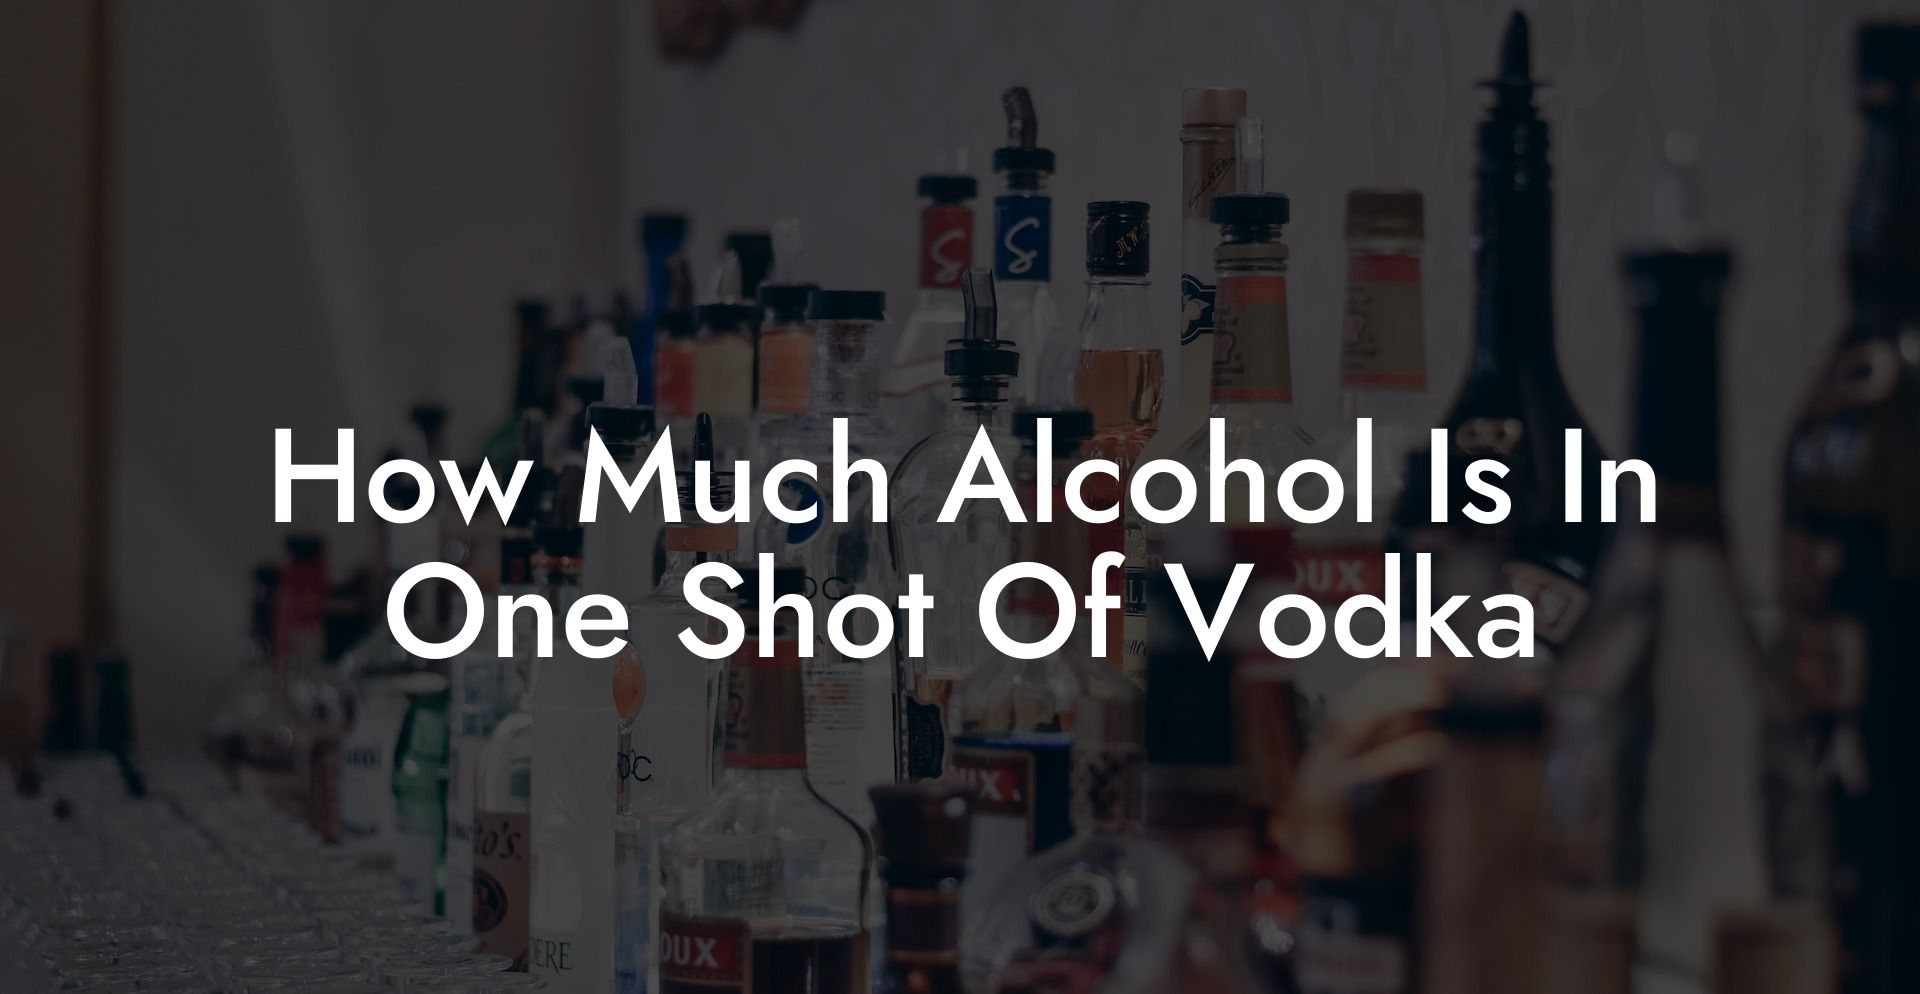 How Much Alcohol Is In One Shot Of Vodka